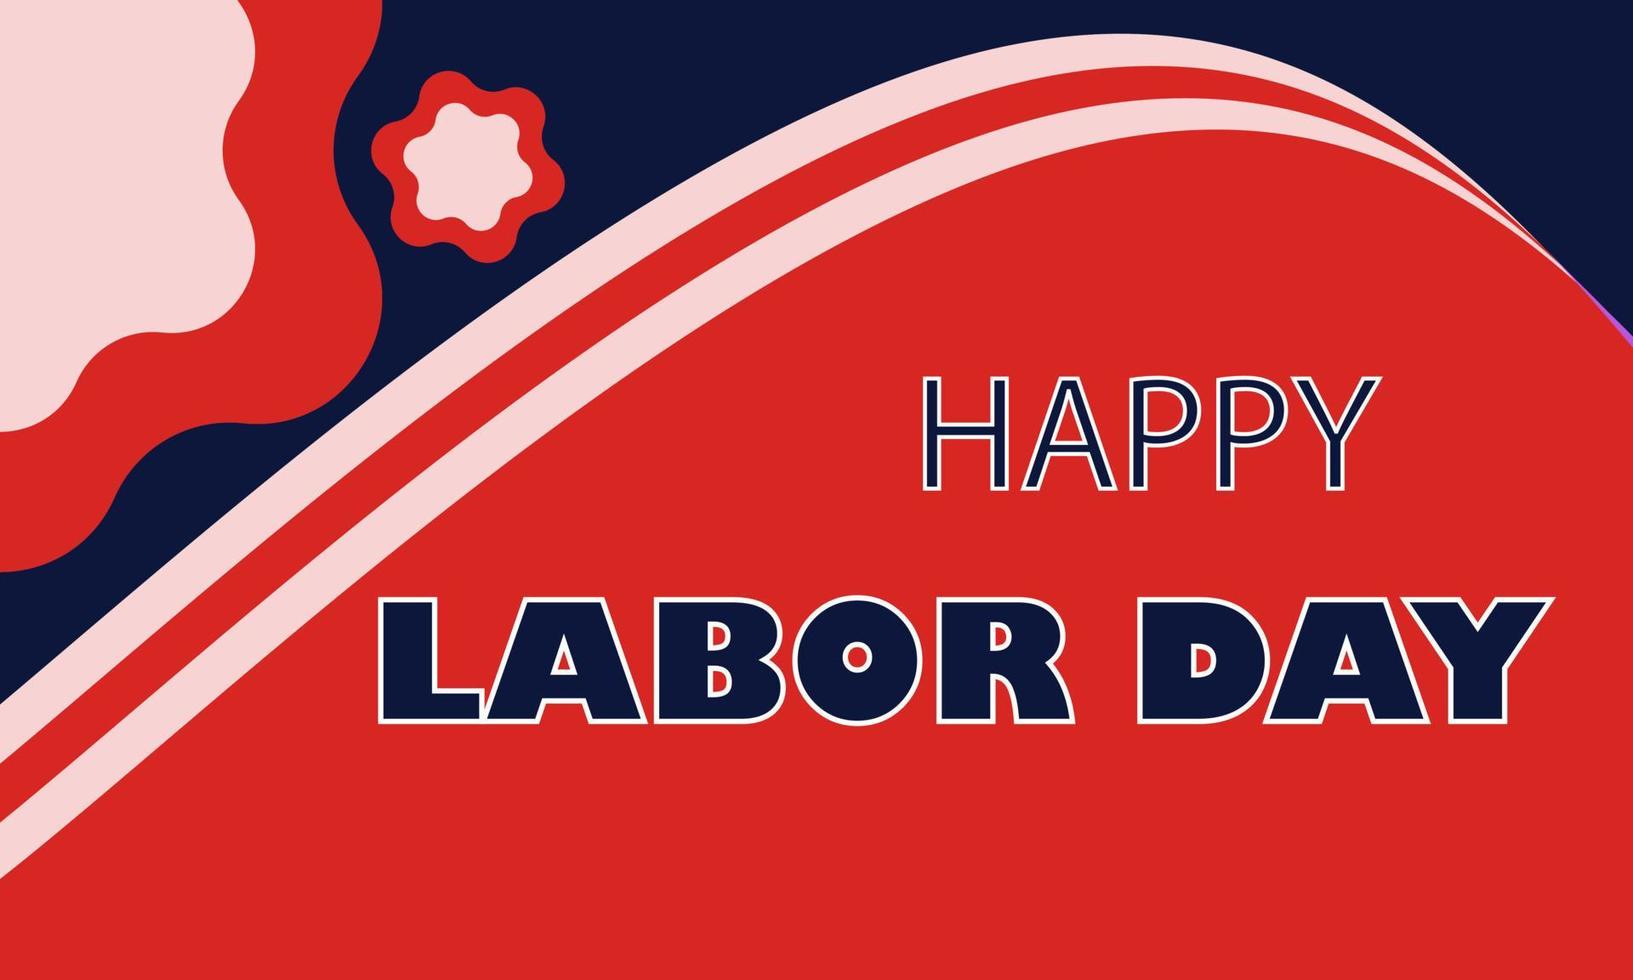 HAPPY LABOR DAY BANNER WITH BLUE BACKGROUND vector